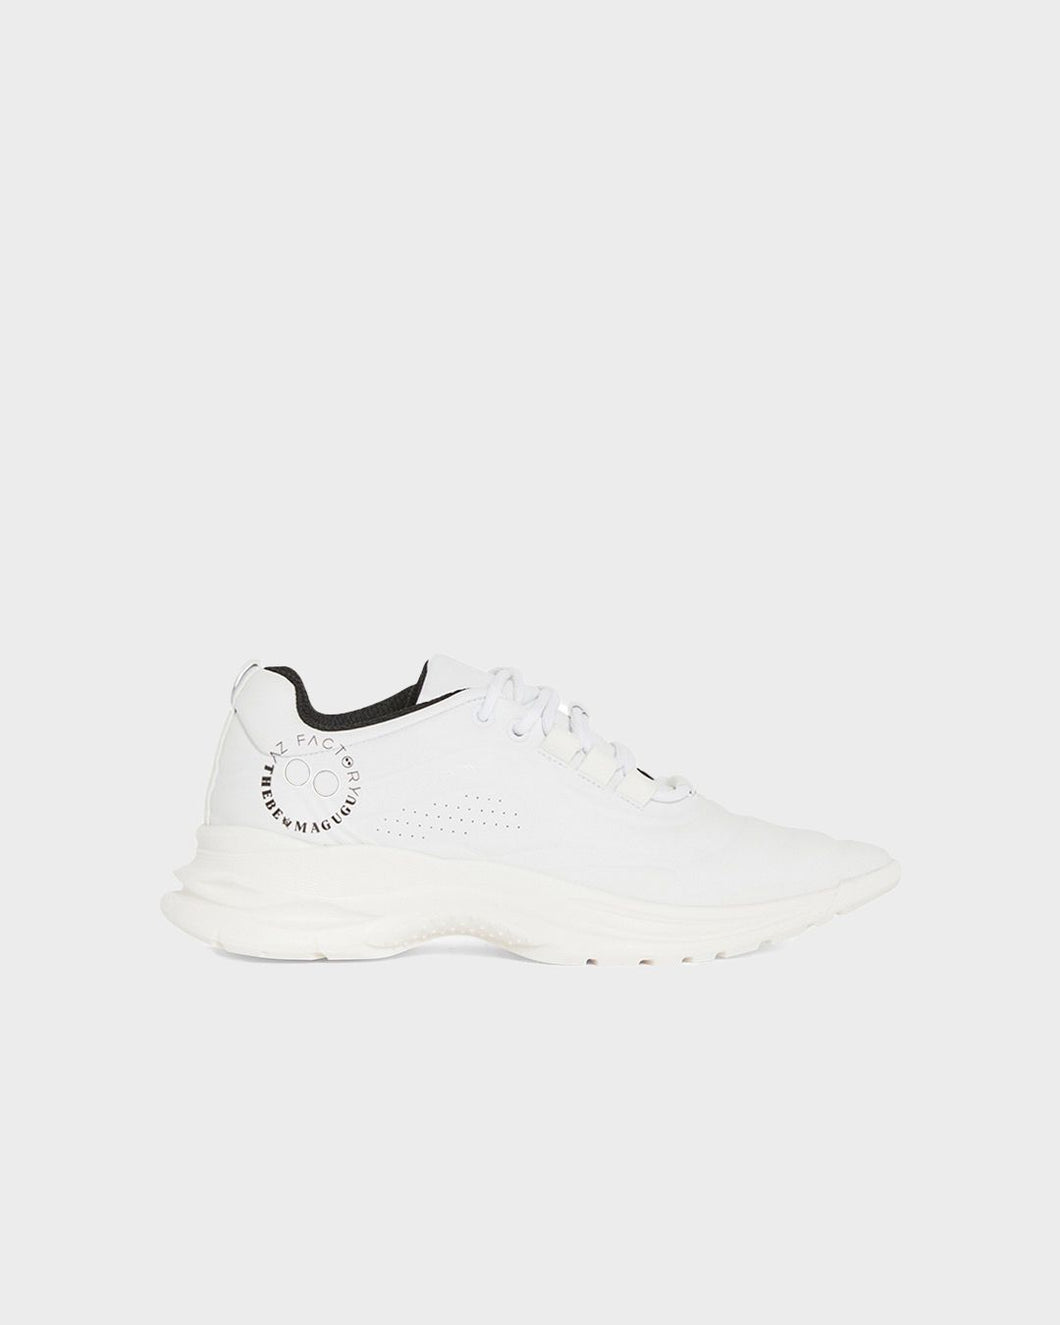 POINTY SNEAKS 1.2 X THEBE MAGUGU - WHITE